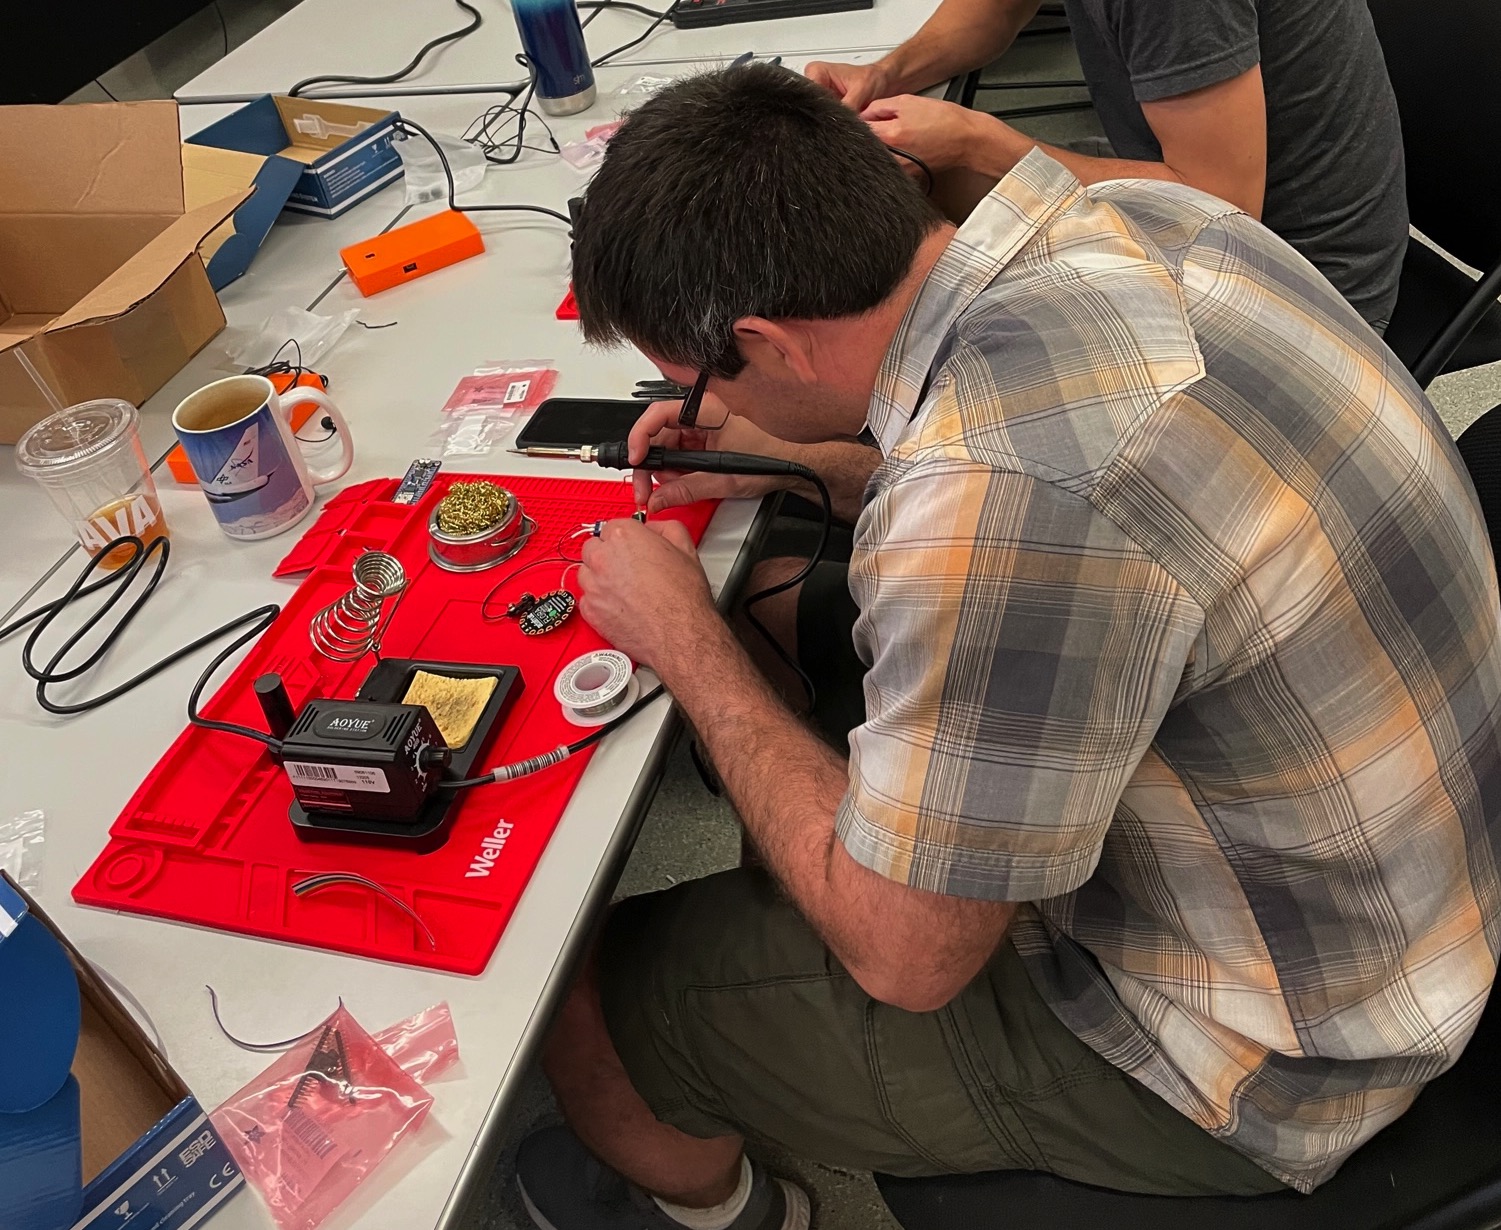 The side profile of a man in green shorts and a plaid short sleeve top wearing glasses is working at a soldering station soldering a component of the LightSound device. The table around him is scattered with supplies and a coffee mug.